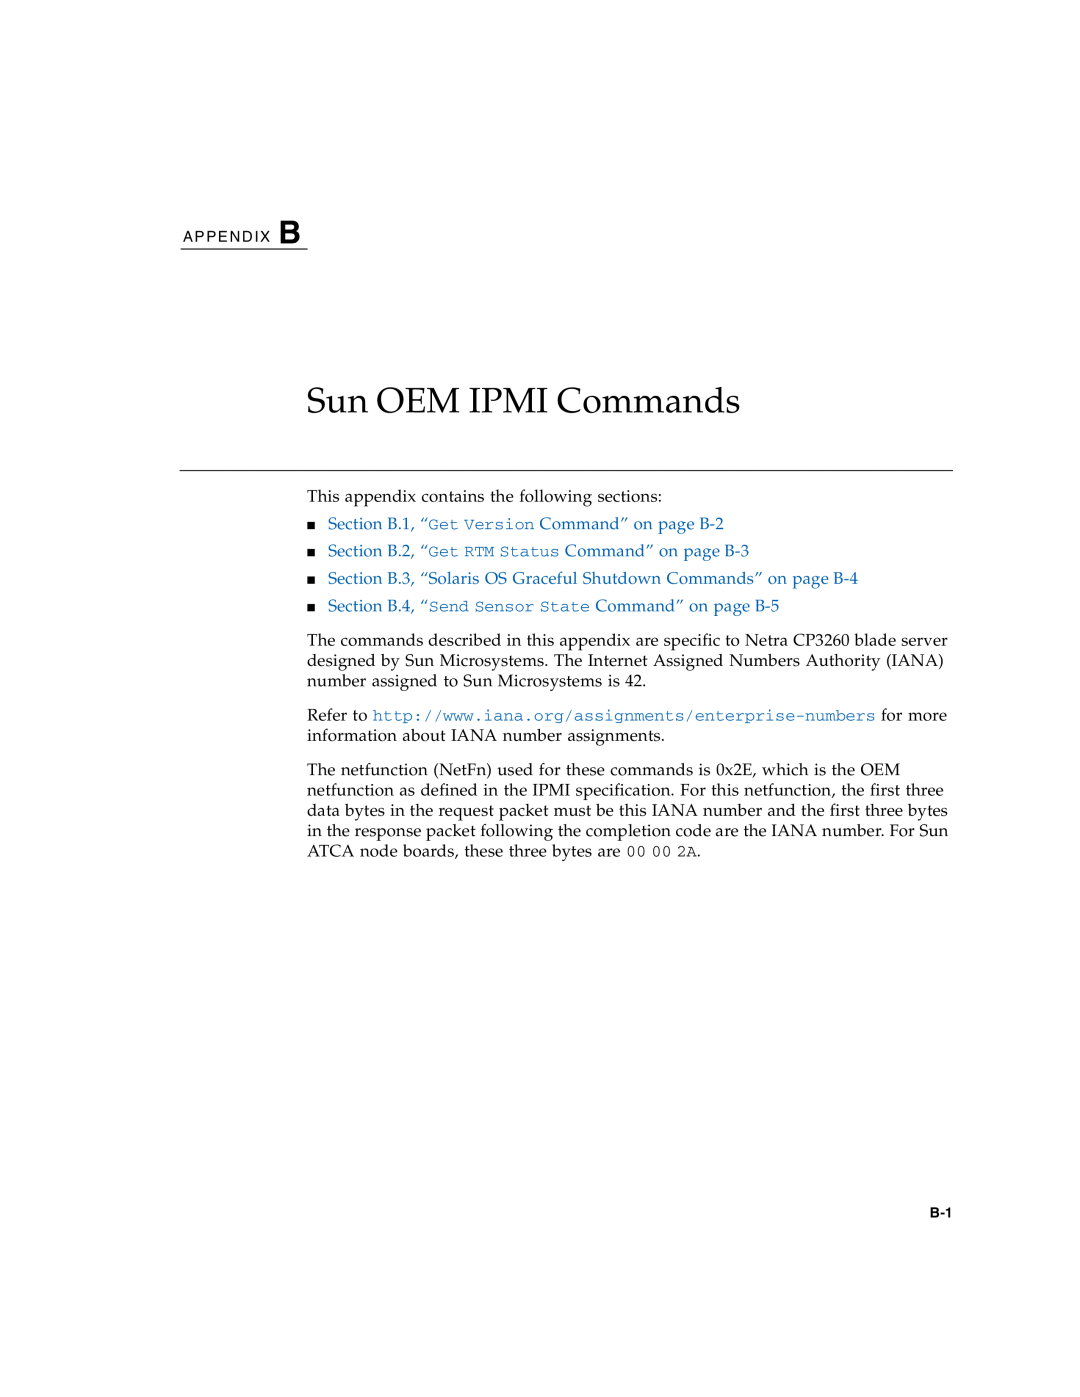 Sun Microsystems CP3260 manual Sun OEM IPMI Commands, Section B.1, “Get Version Command” on page B-2 